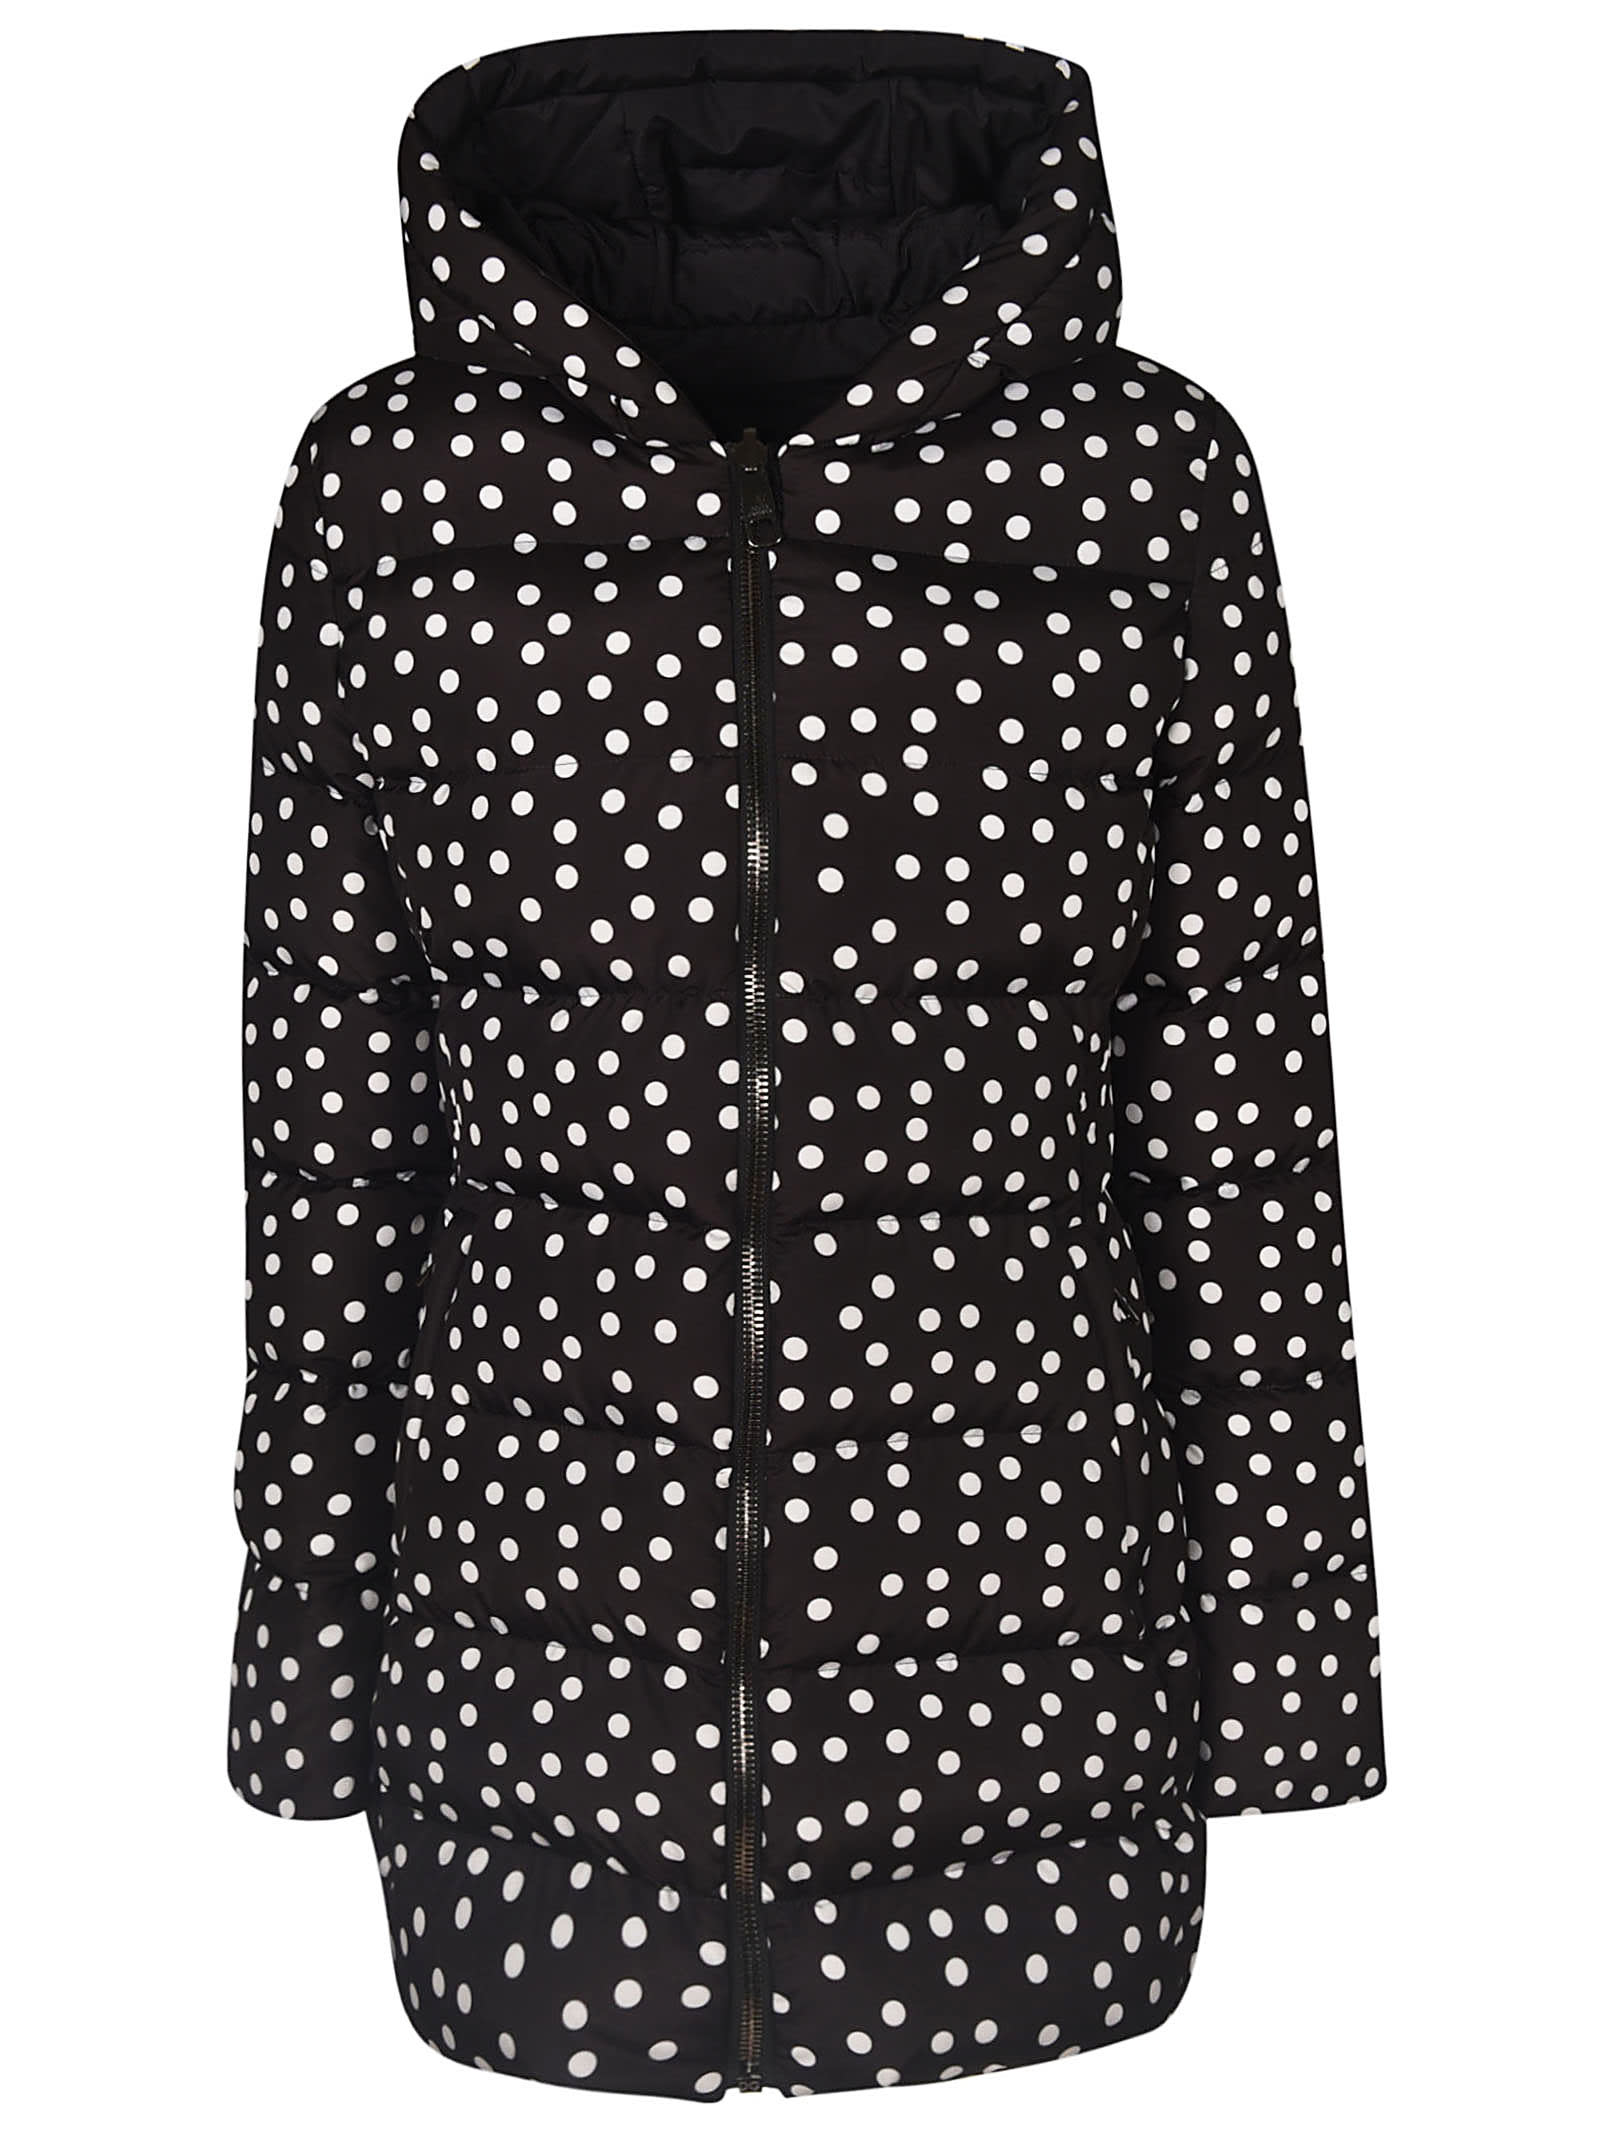 Dolce & Gabbana Dotted All-over Print Hooded Parka